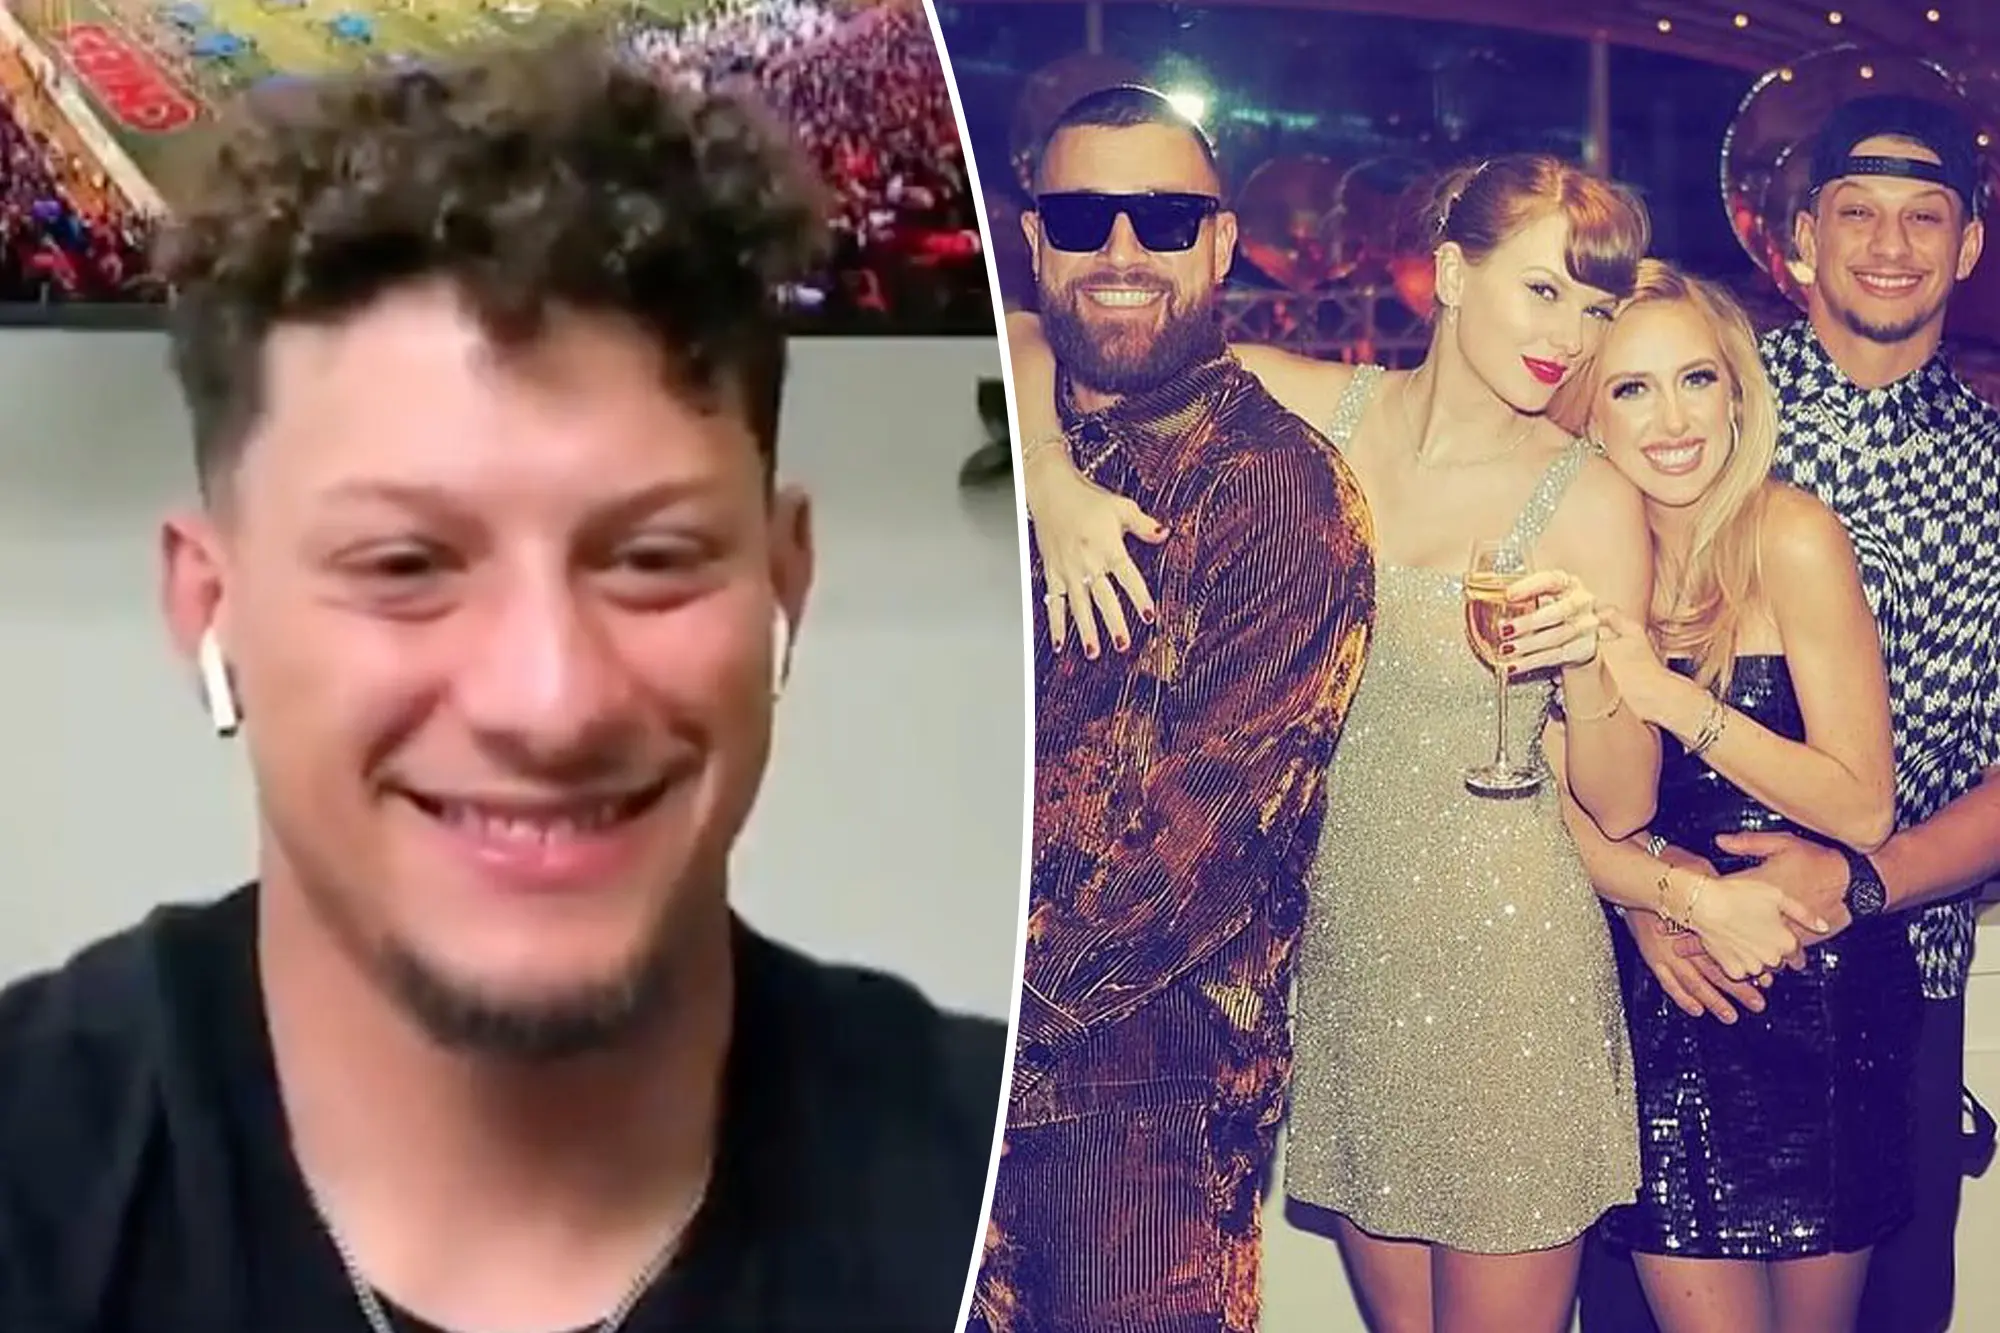 Taylor Swift and Travis Kelce have been the center of attention since they began dating last year. Swift fueled the rumors by frequently attending Kansas City Chiefs’ games: But there’s more to this story. Patrick Mahomes, the star QB of the Chiefs, recently claimed some credit for bringing the couple together.